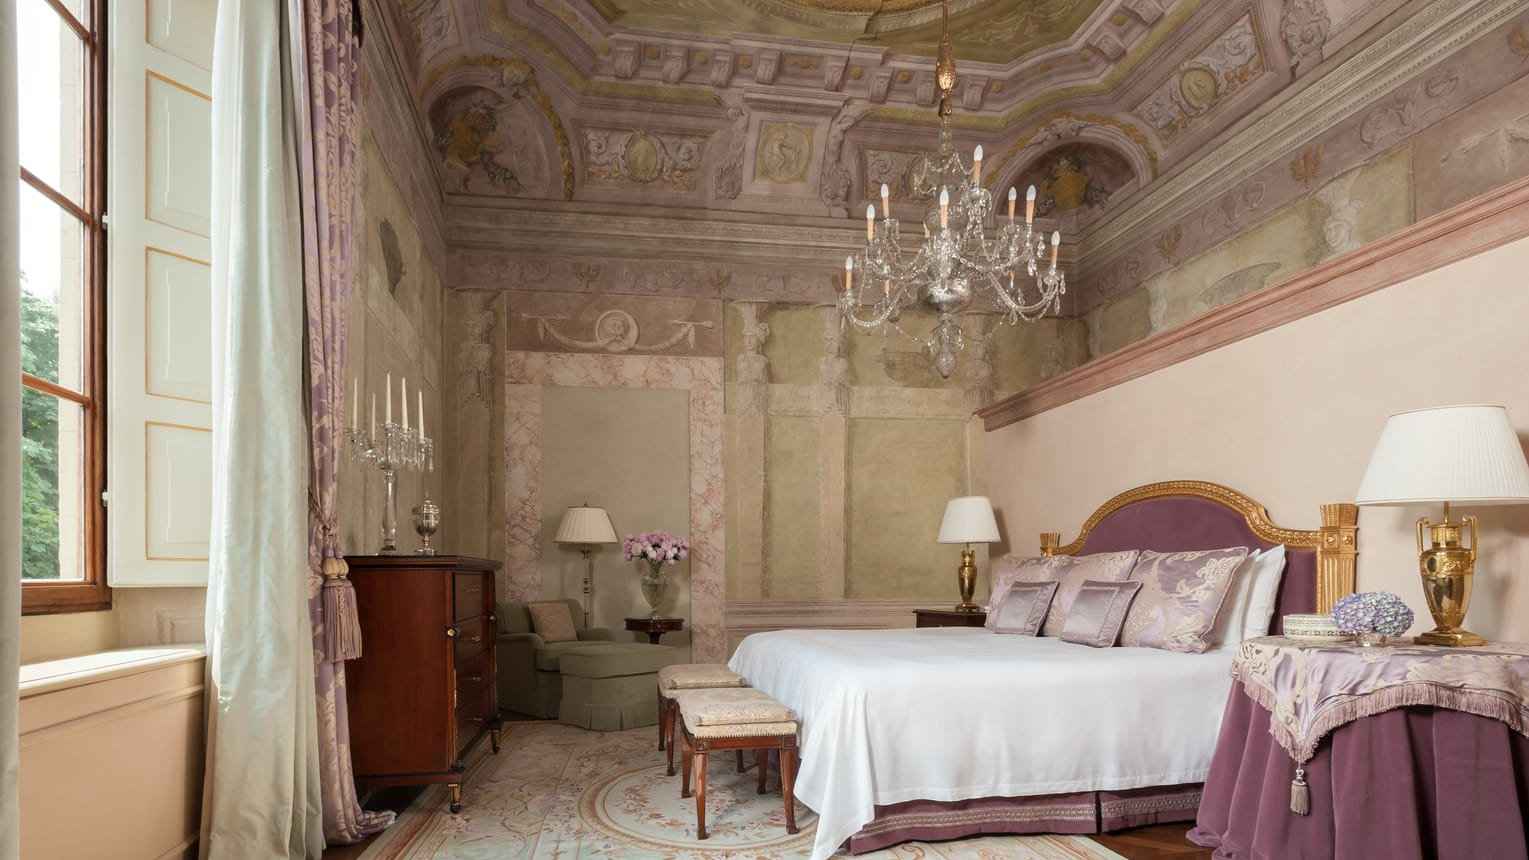 The Four Seasons Hotel Firenze will make you feel like a gay princess while visiting Florence